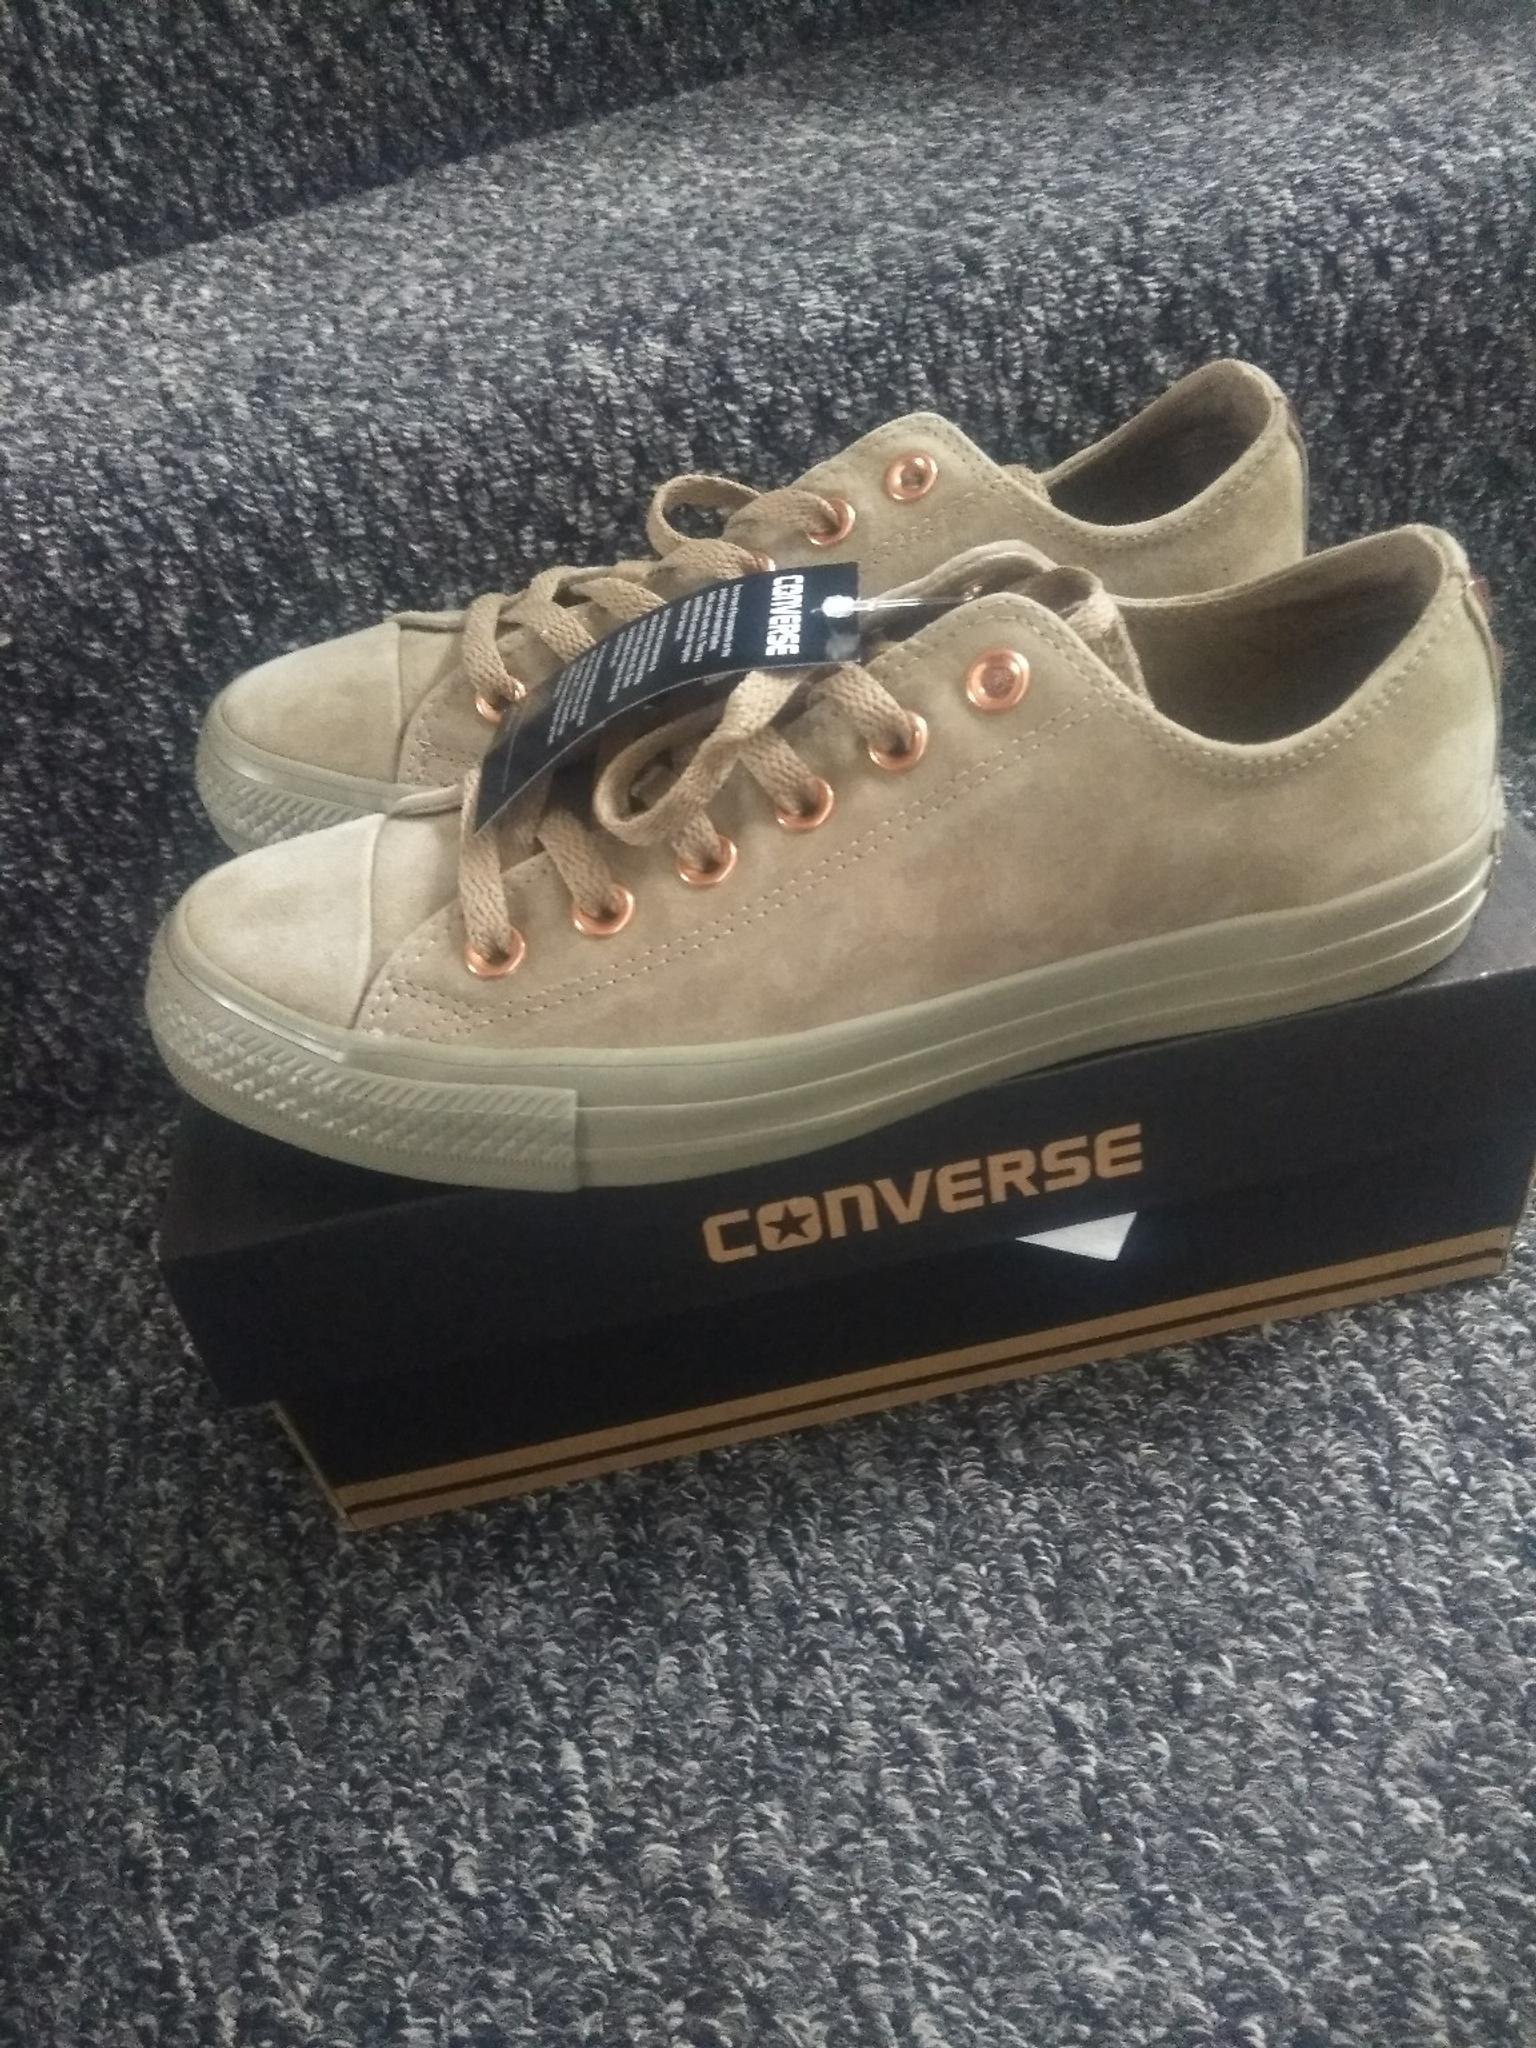 rose gold converse size 6